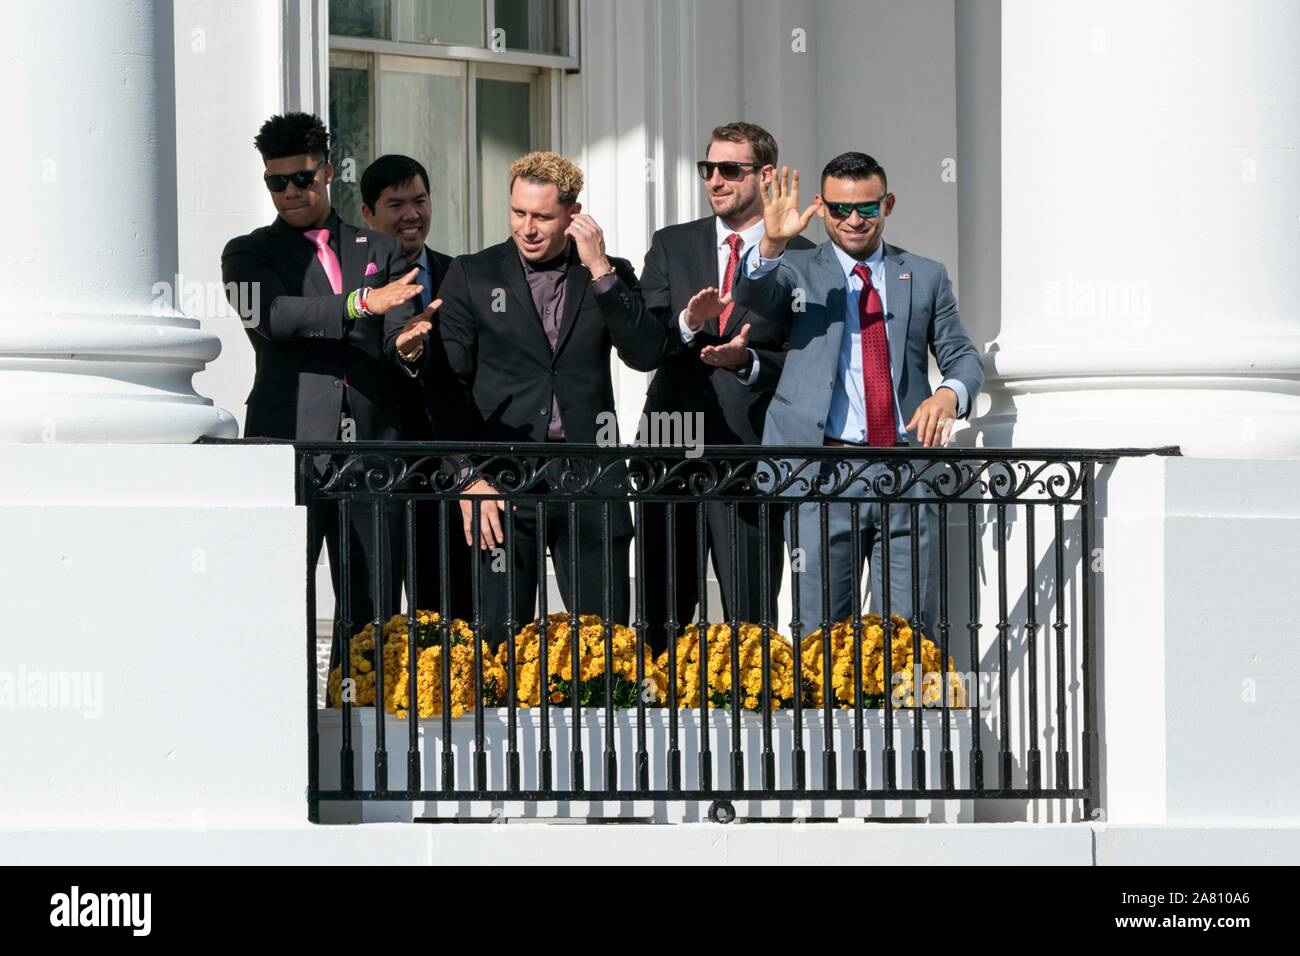 Washington, United States of America. 04 November, 2019. Washington Nationals team members wave to gathered fans from the South Portico balcony of the White House November 4, 2019 in Washington, DC. The 2019 Baseball World Series Champions attended an event in their honor by U.S. President Donald Trump to celebrate their victory.  Credit: Andrea Hanks/White House Photo/Alamy Live News Stock Photo